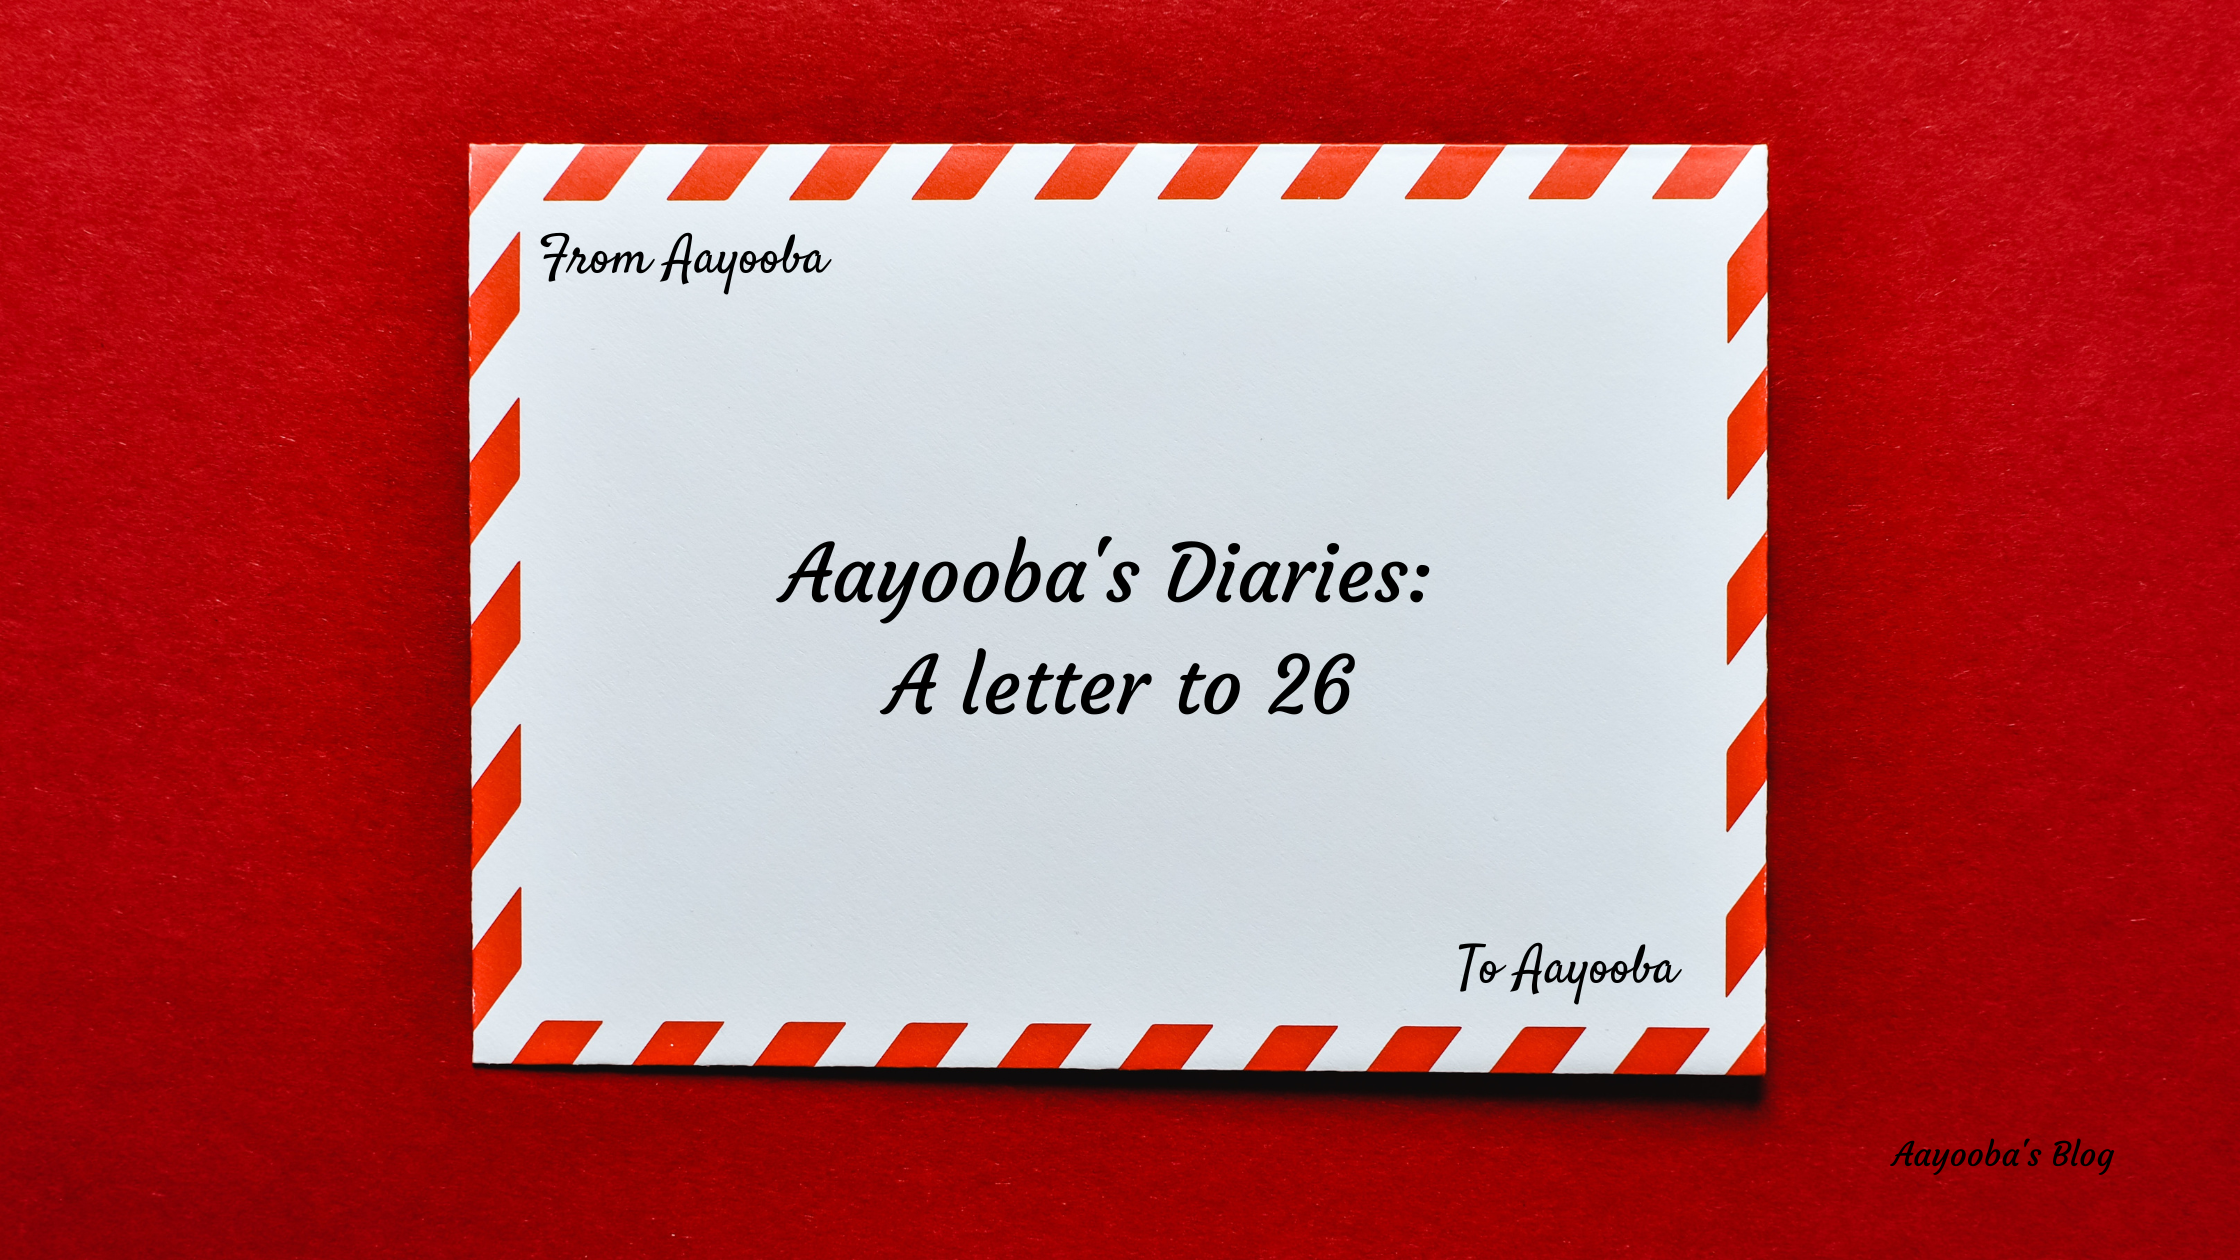 Aayooba’s Diaries: A Letter to 26